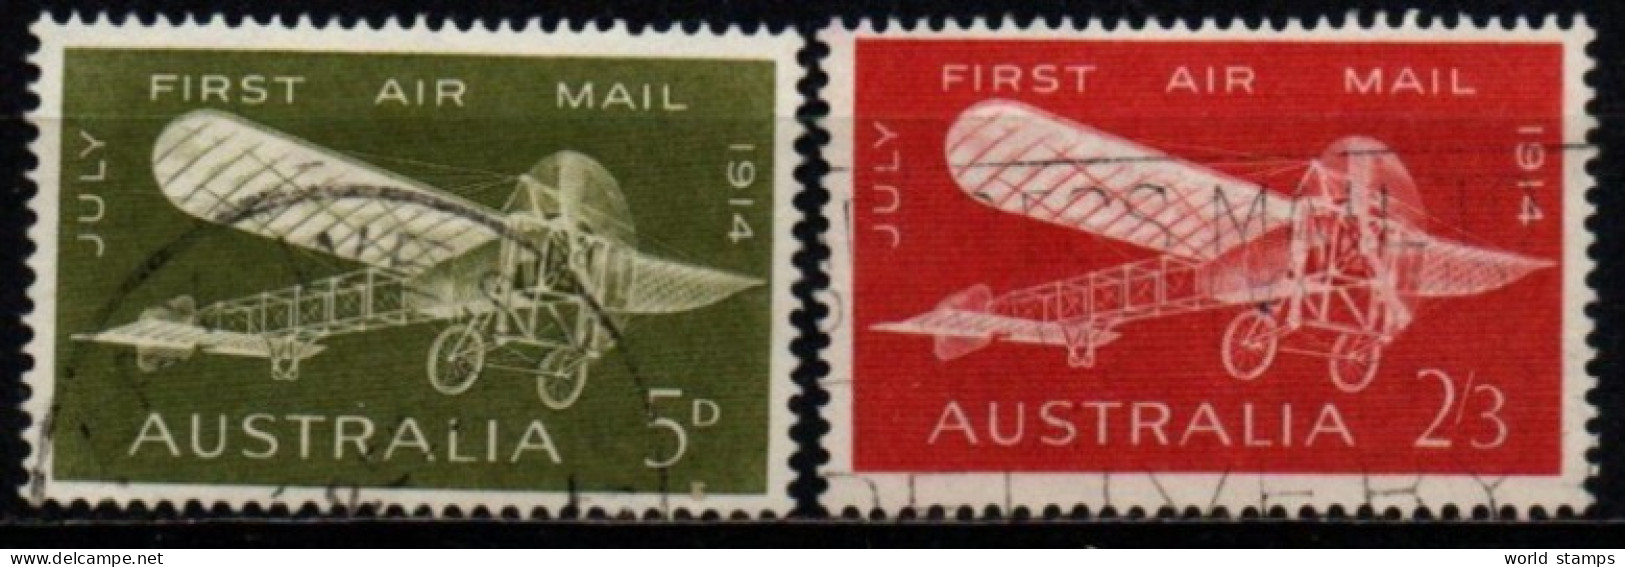 AUSTRALIE 1964 O - Used Stamps